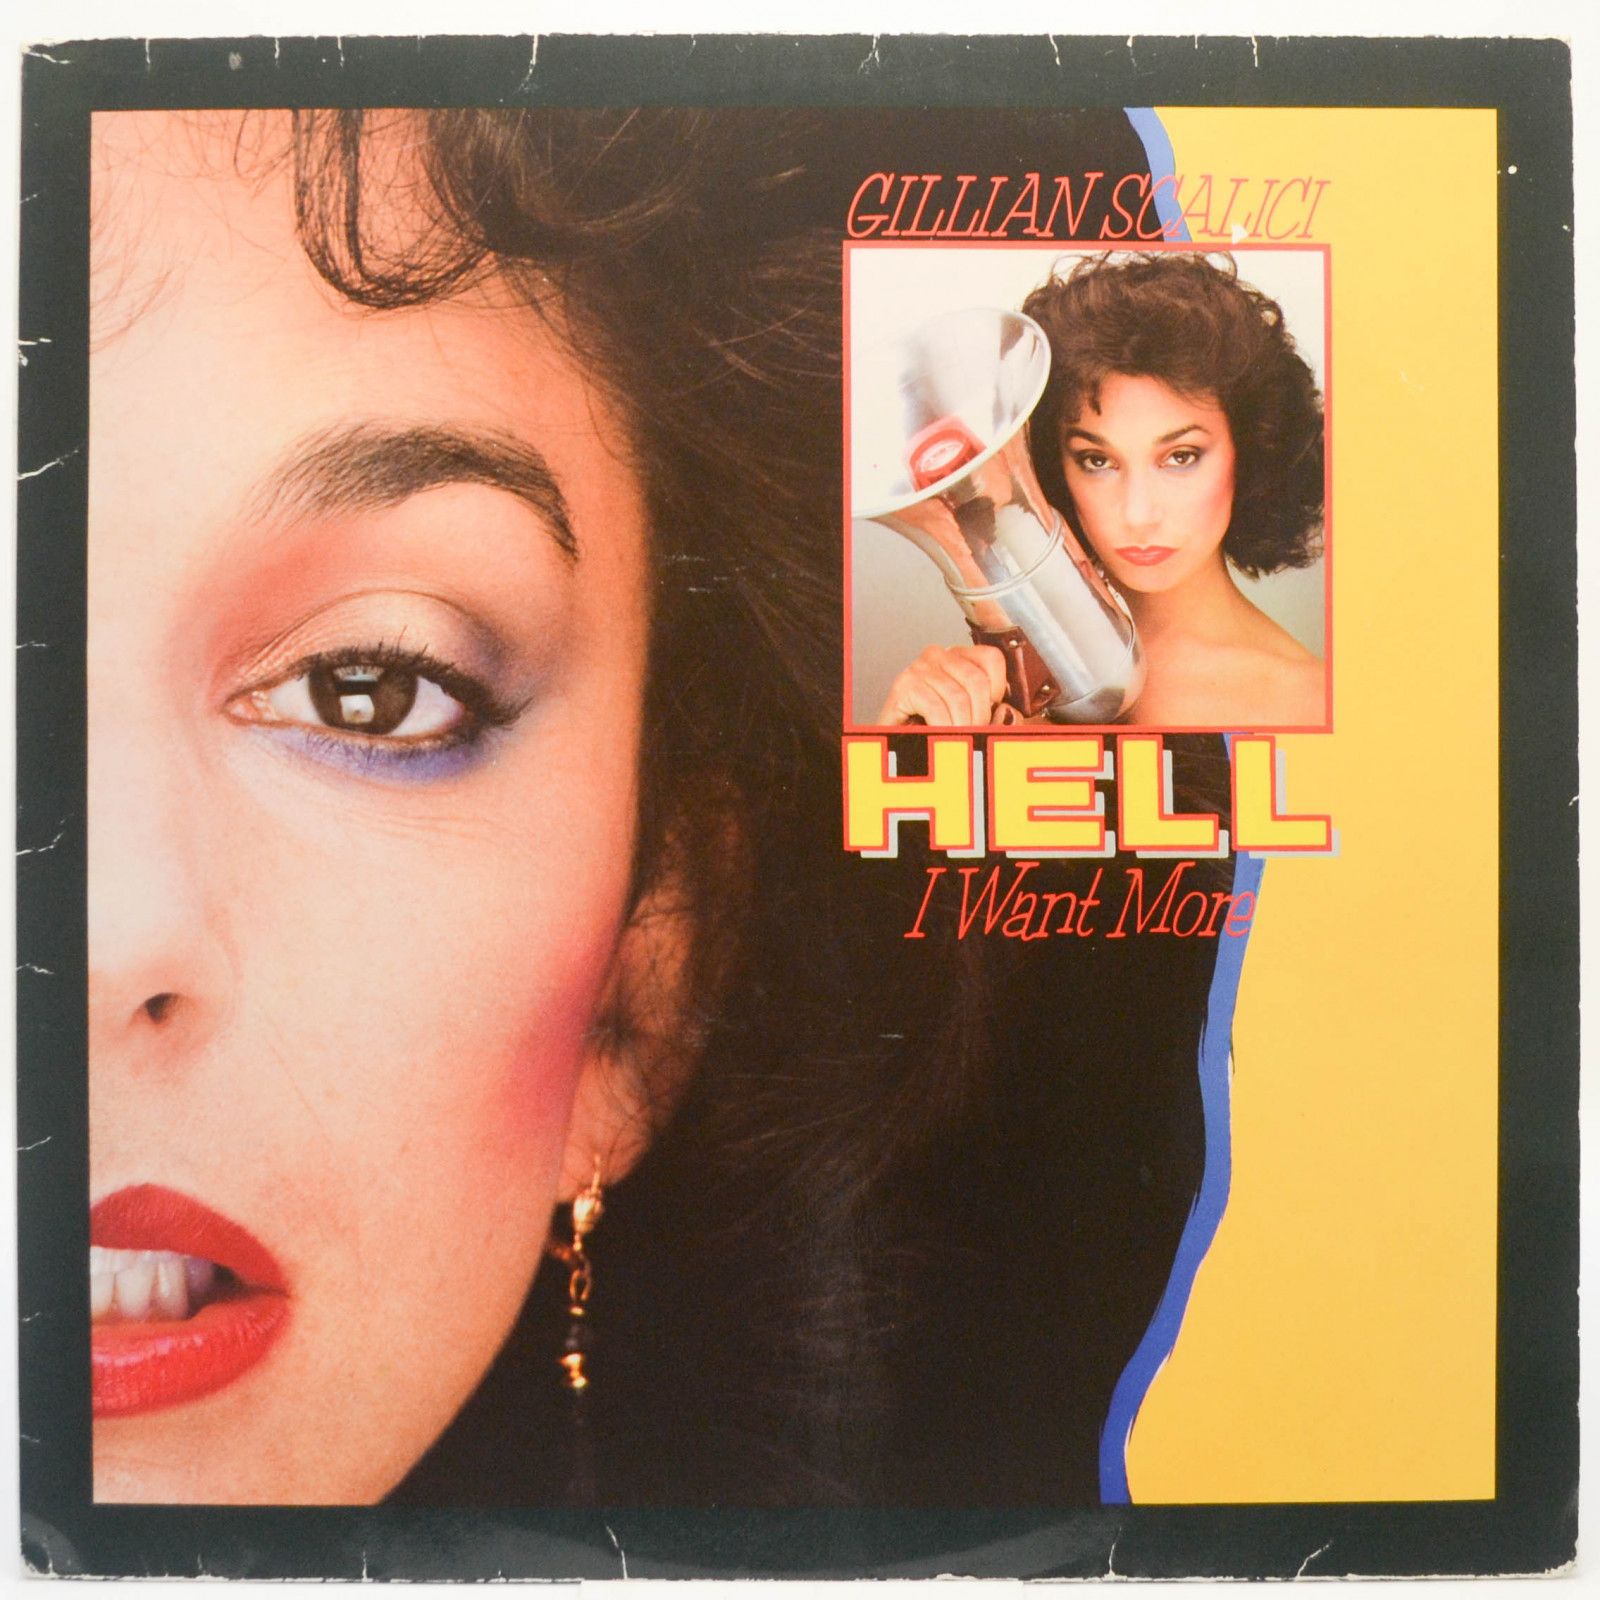 Gillian Scalici — Hell, I Want More, 1980